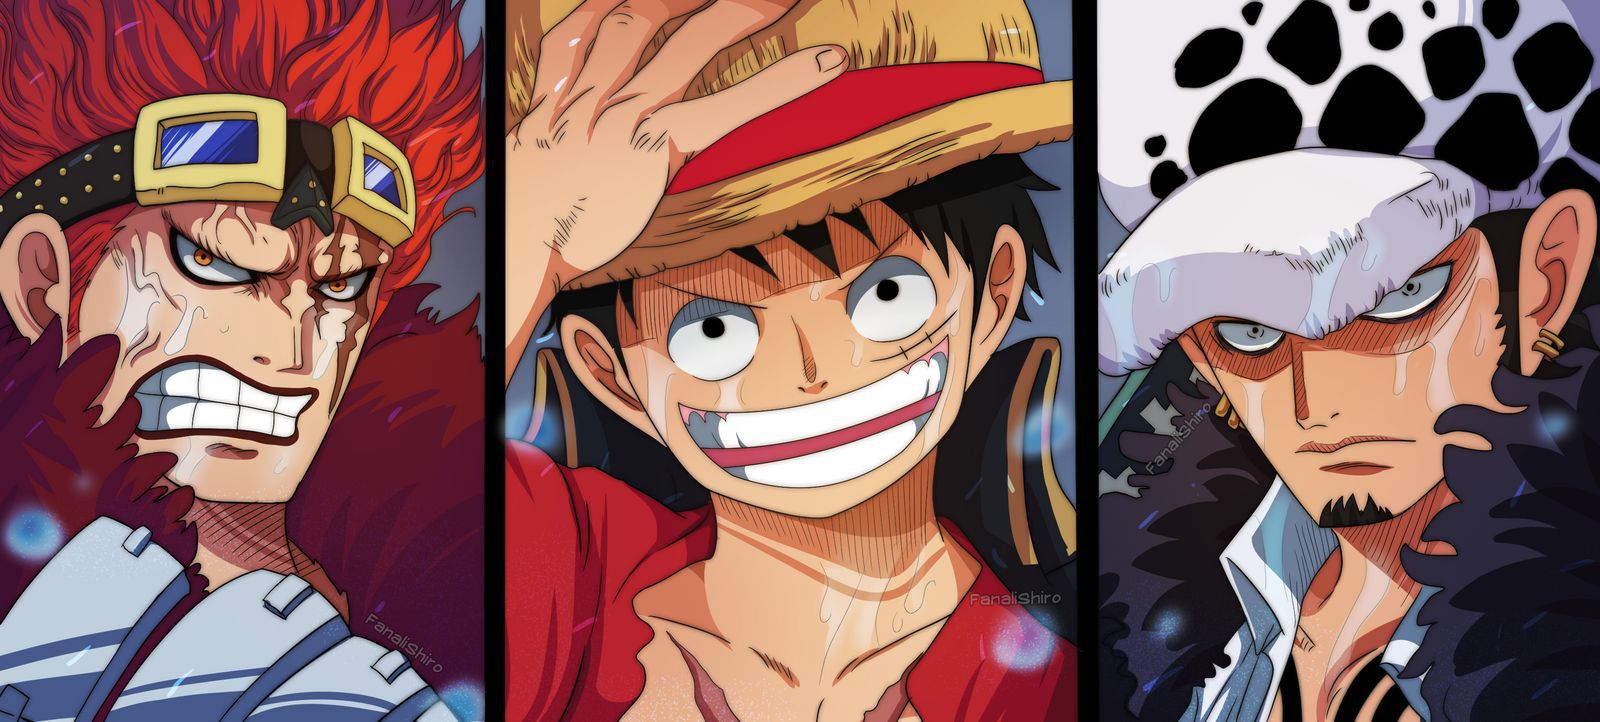 ONE PIECE: the worst generation meets Spongebob in an epic crossover ...